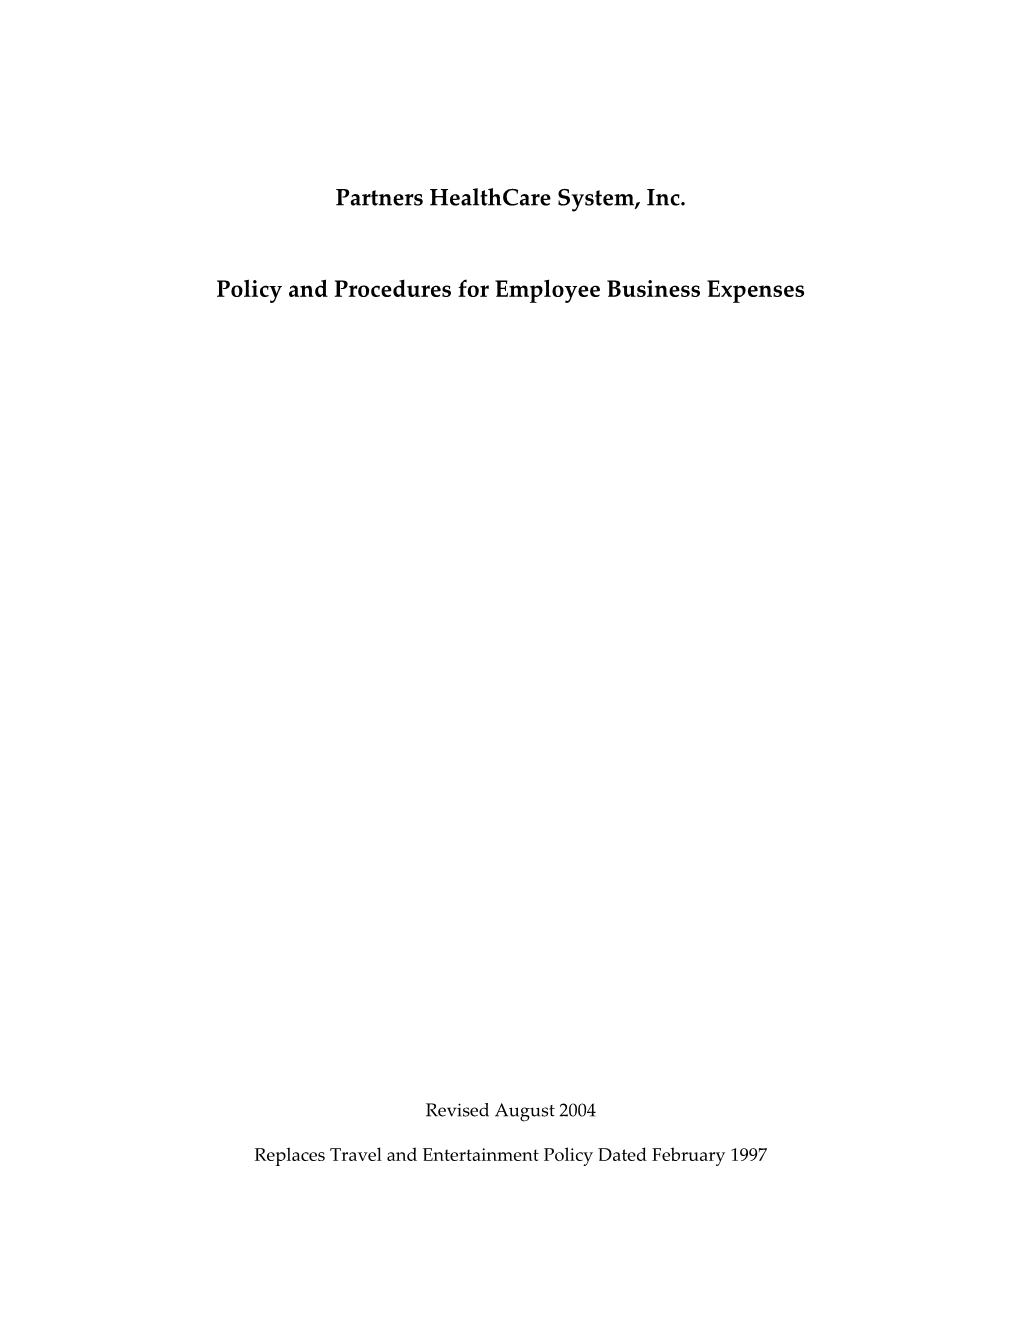 Policy and Procedures for Employee Business Expenses